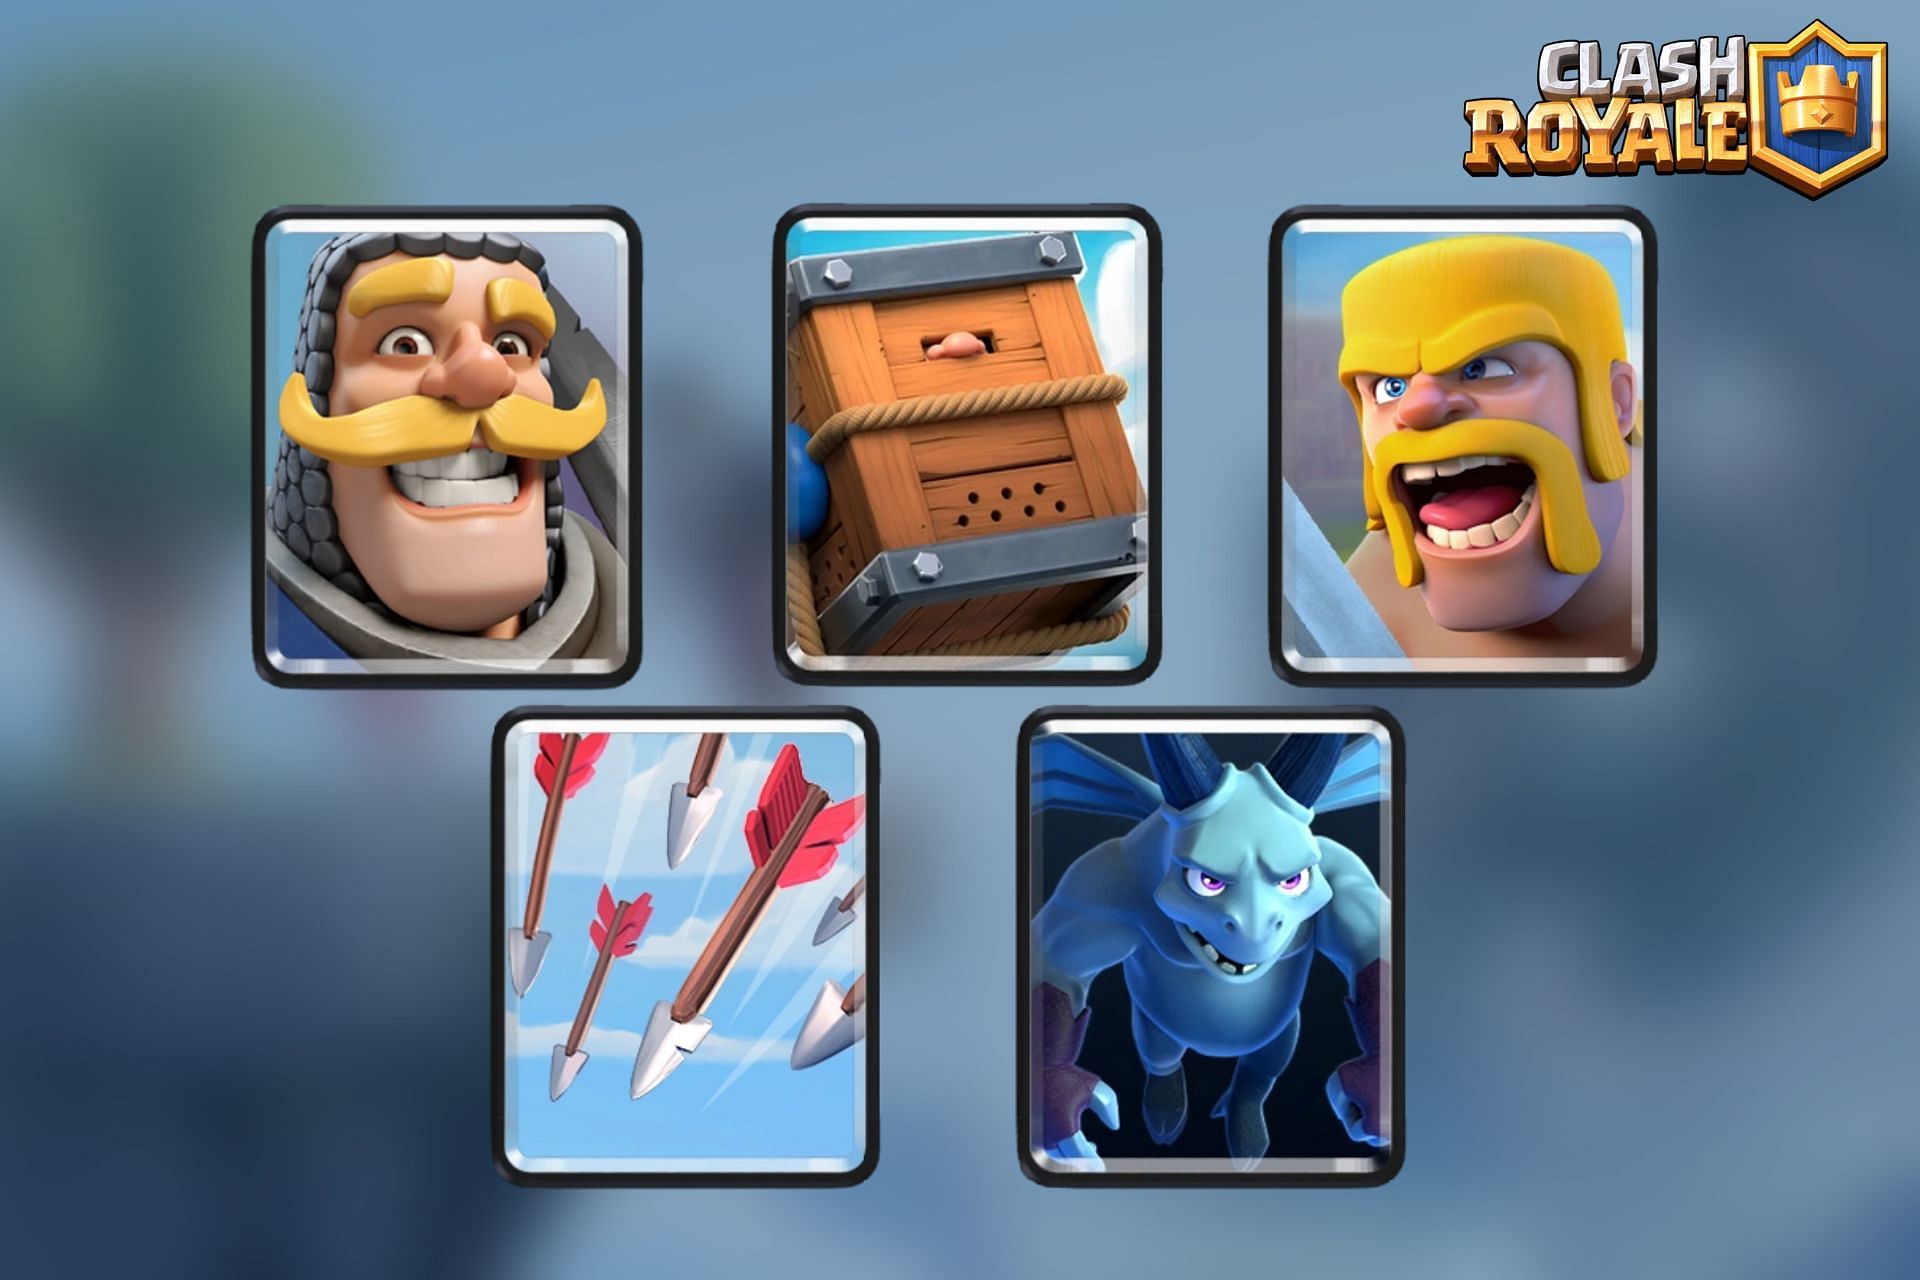 5 Best Common Cards For August Royal Tournament In Clash Royale